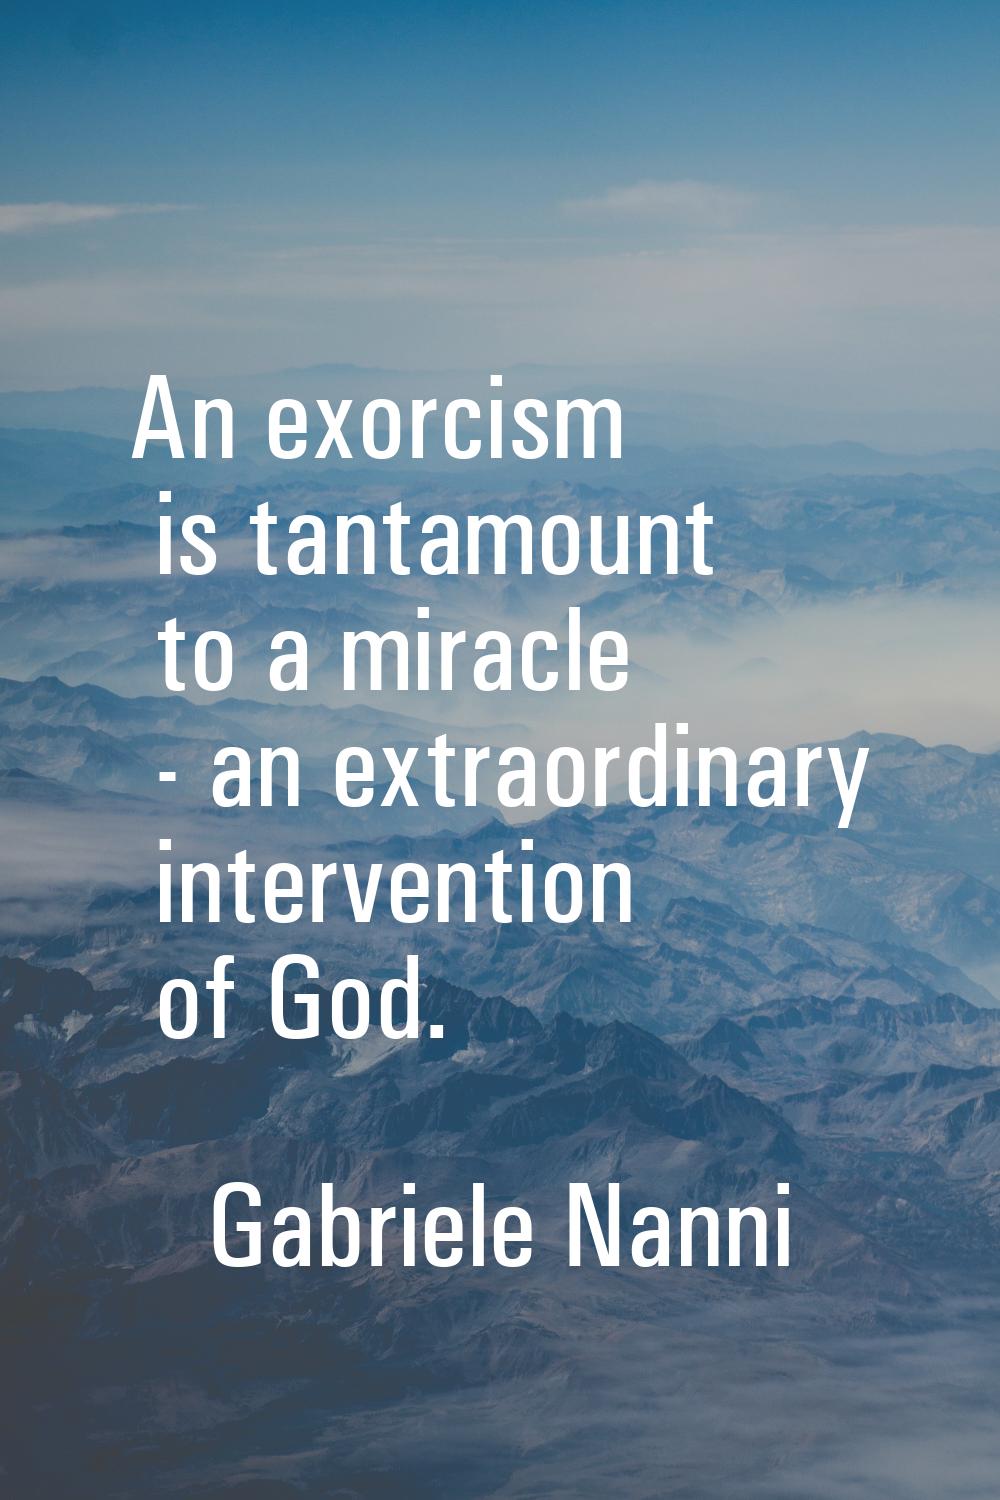 An exorcism is tantamount to a miracle - an extraordinary intervention of God.